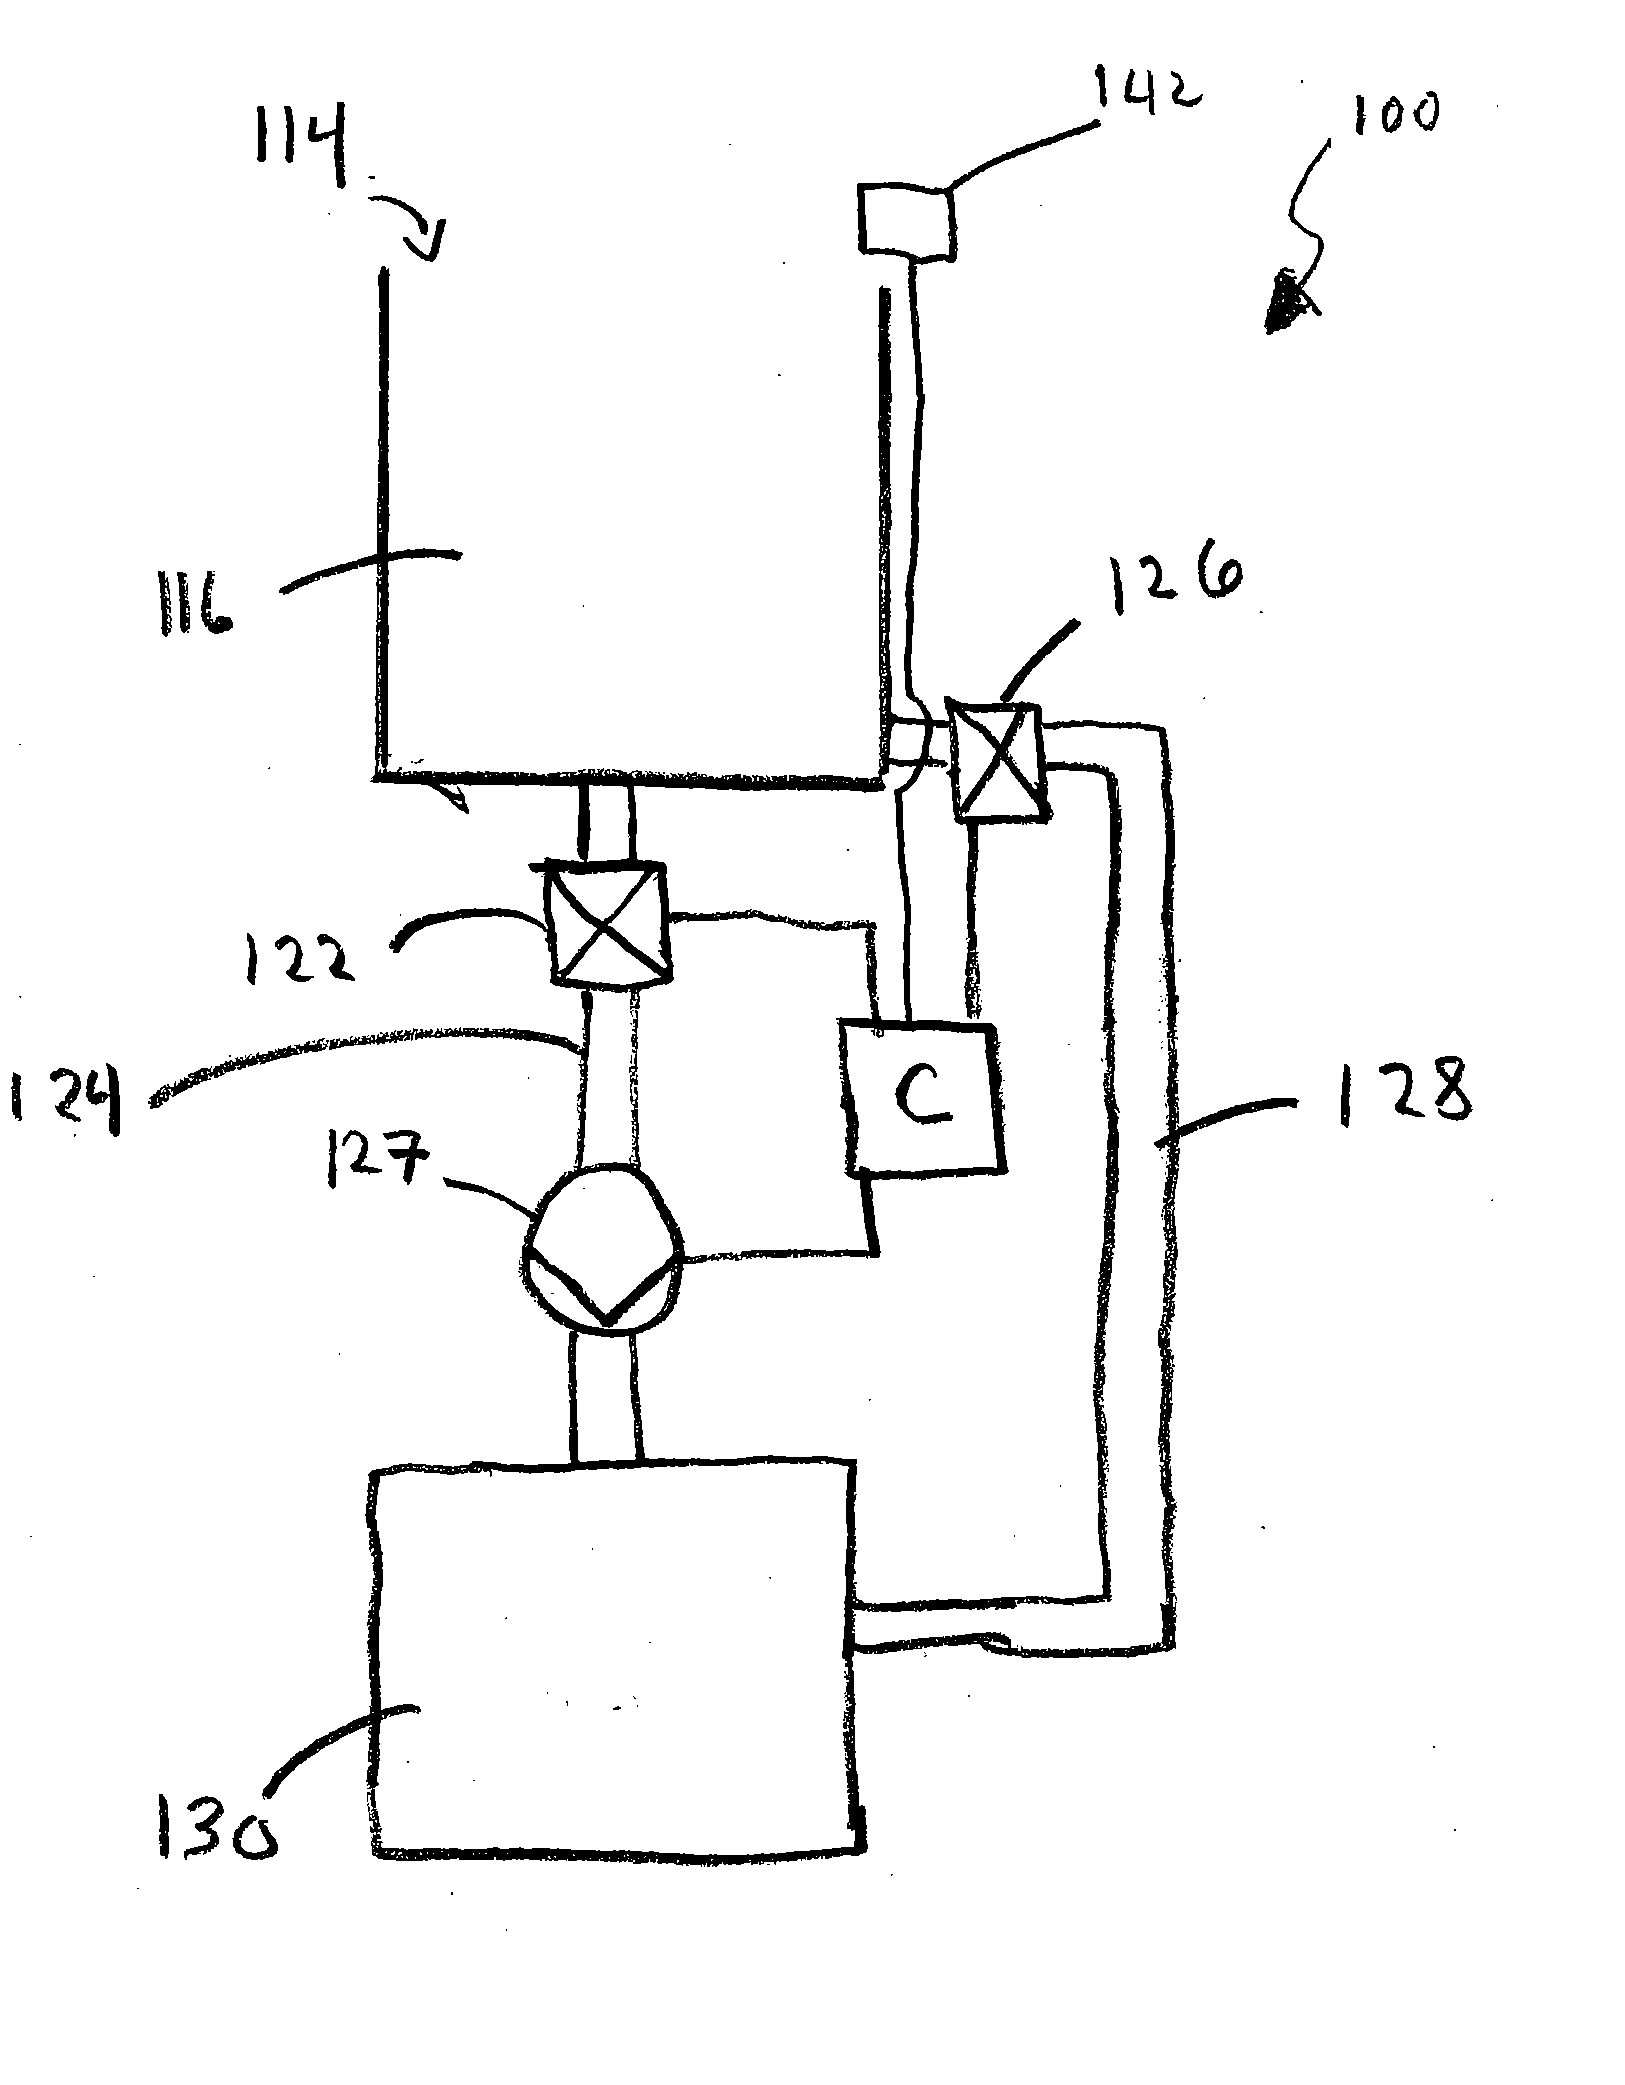 Automatic cooking medium filtering systems and methods